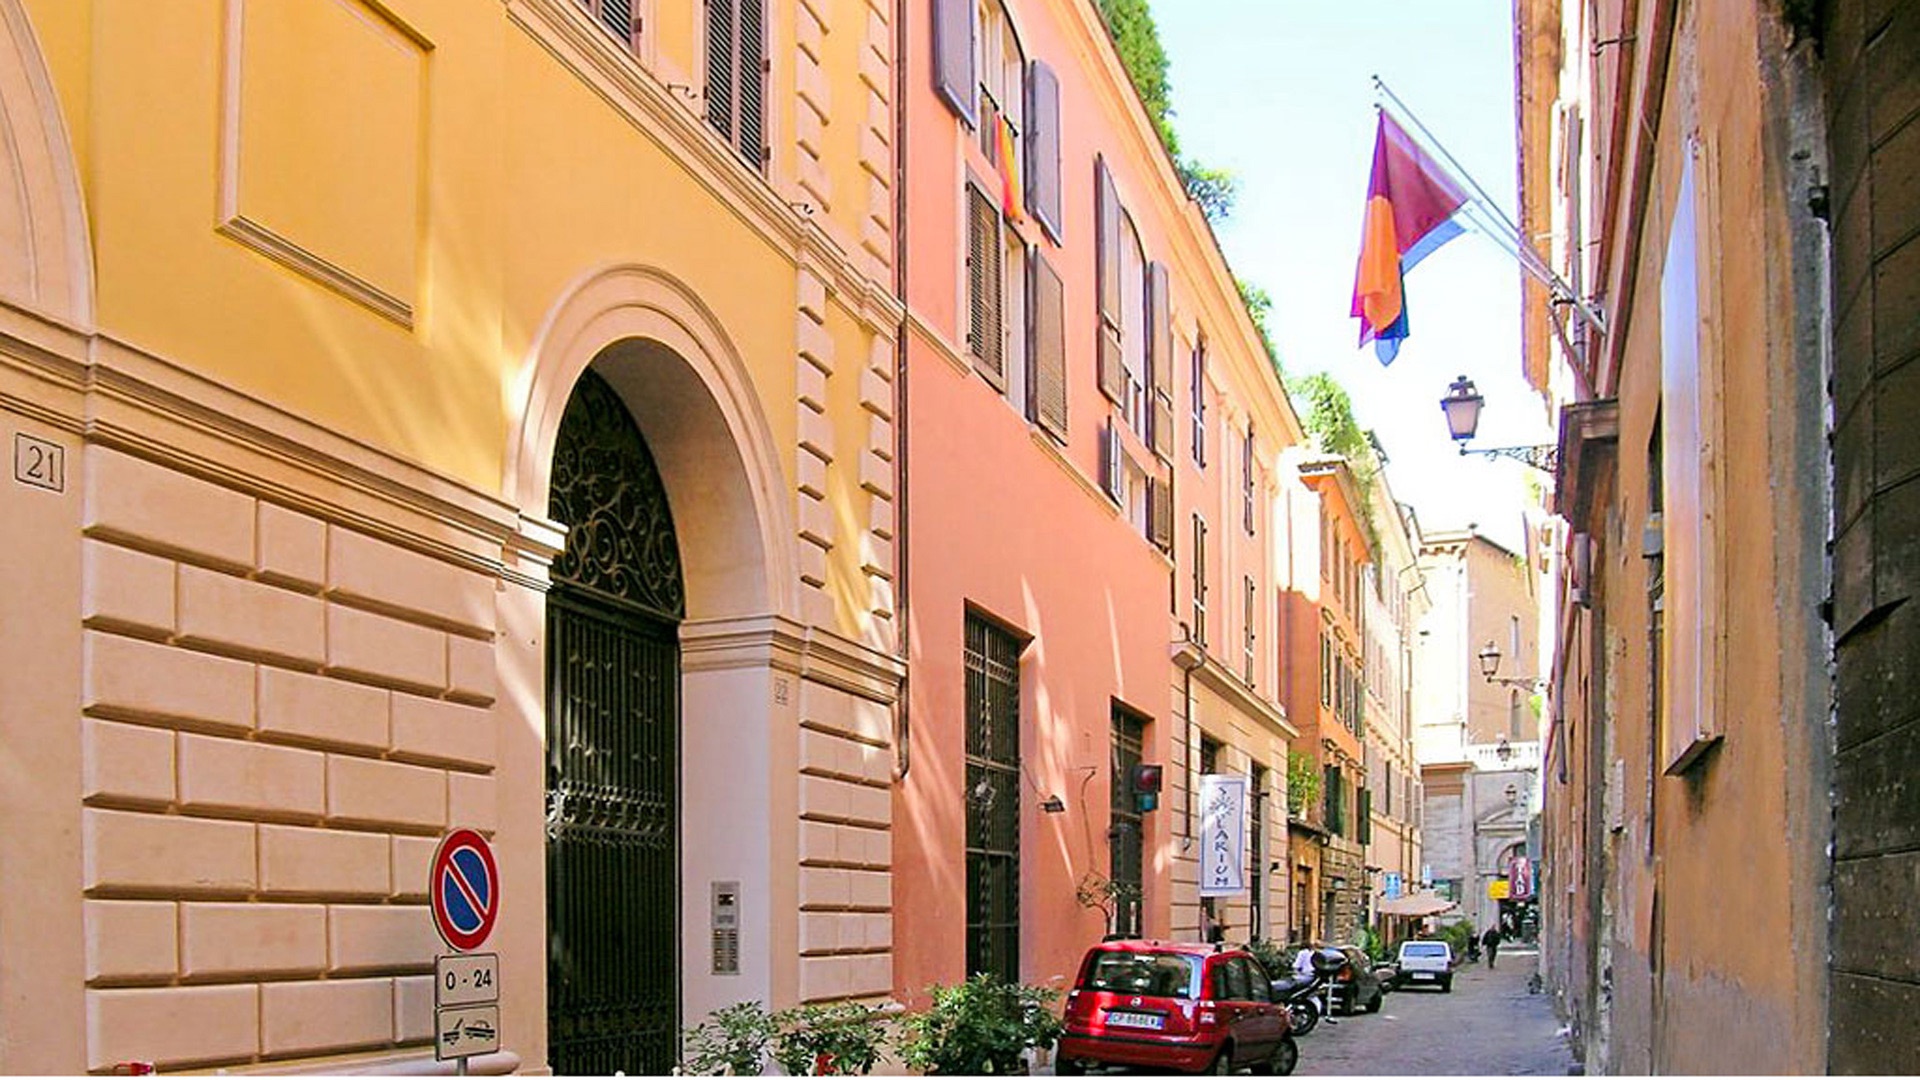 Via di San Giacomo carries only local traffic. Even residents must have a permit to travel here.